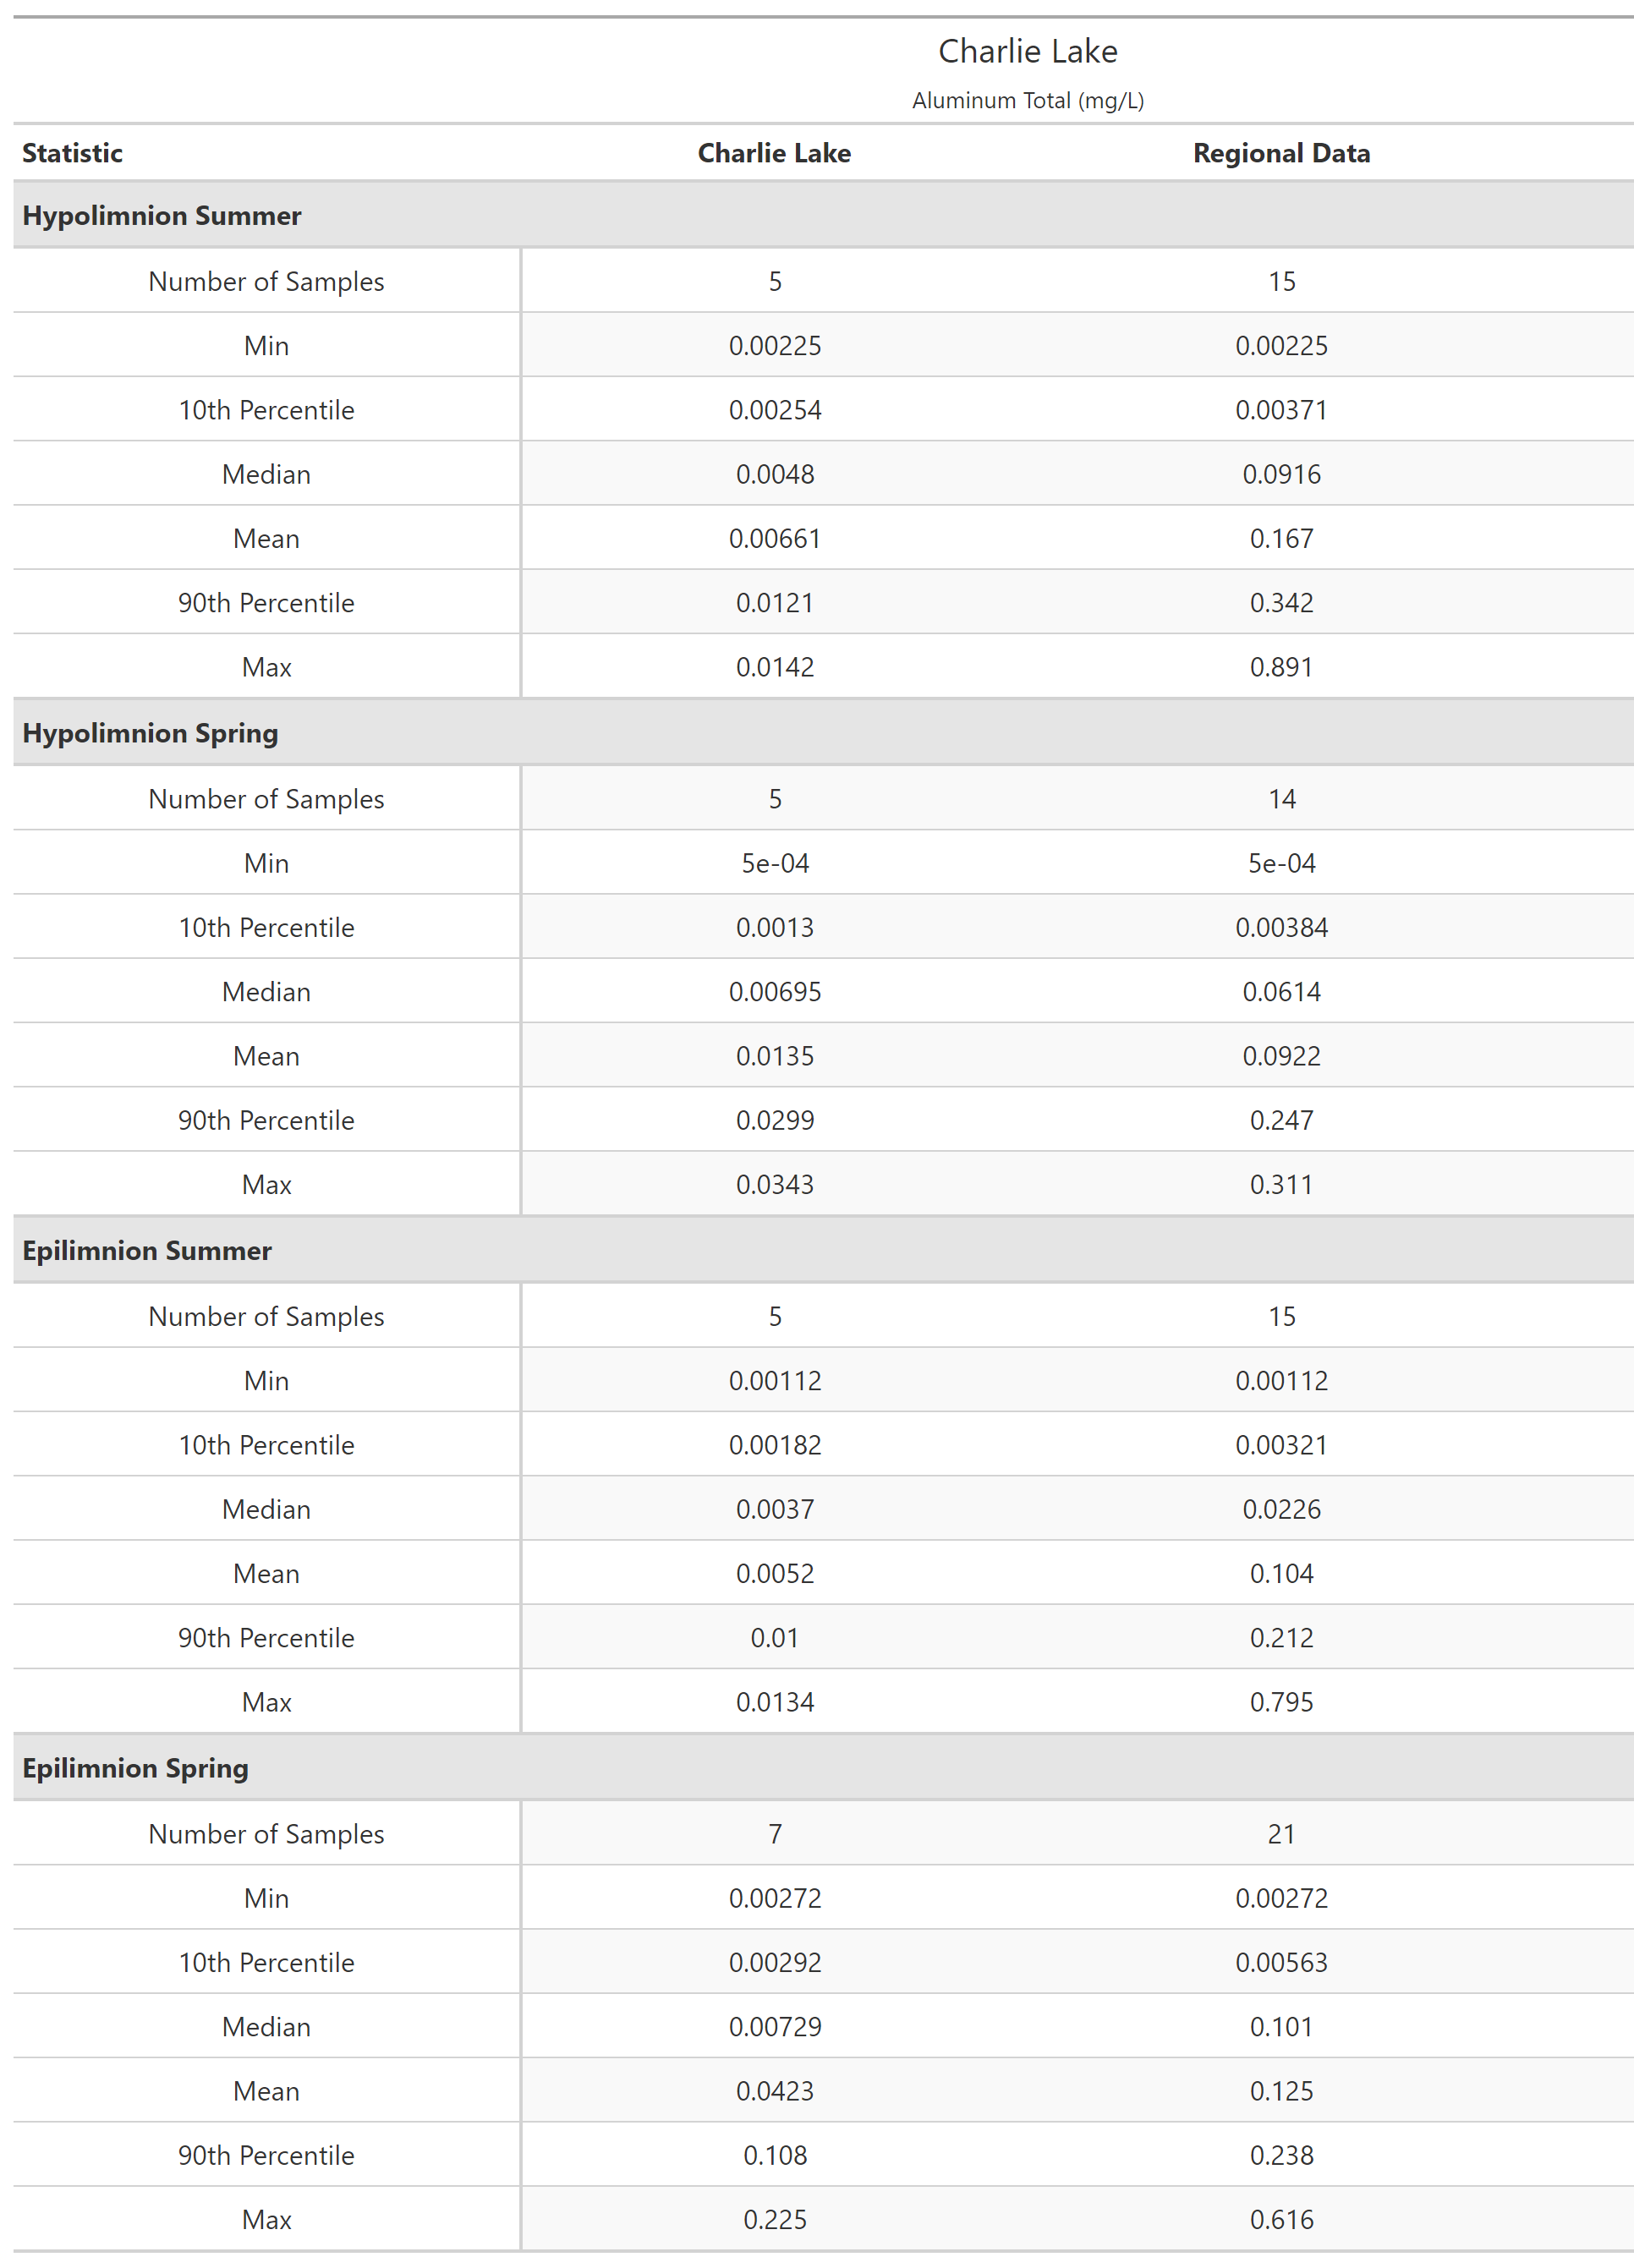 A table of summary statistics for Aluminum Total with comparison to regional data